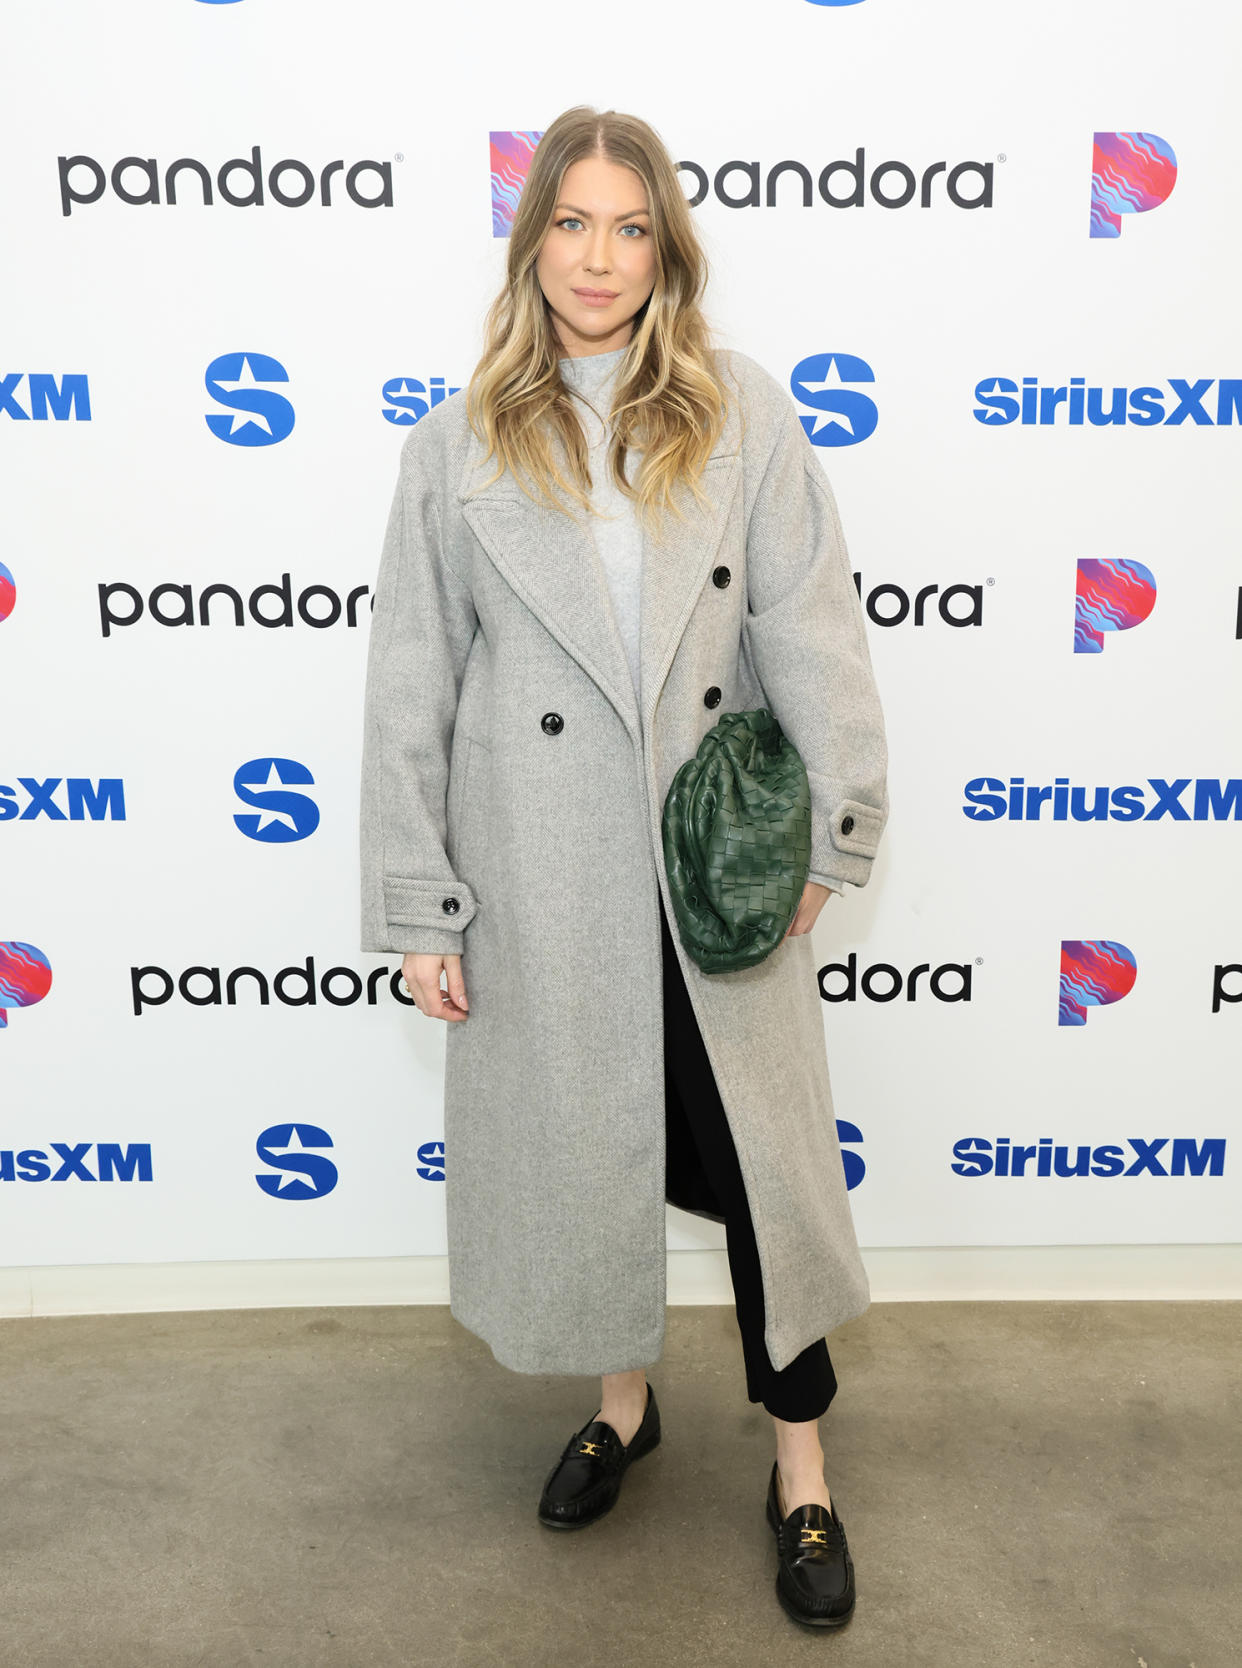 Stassi Schroeder at SiriusXM in Los Angeles, CA on January 24, 2024.